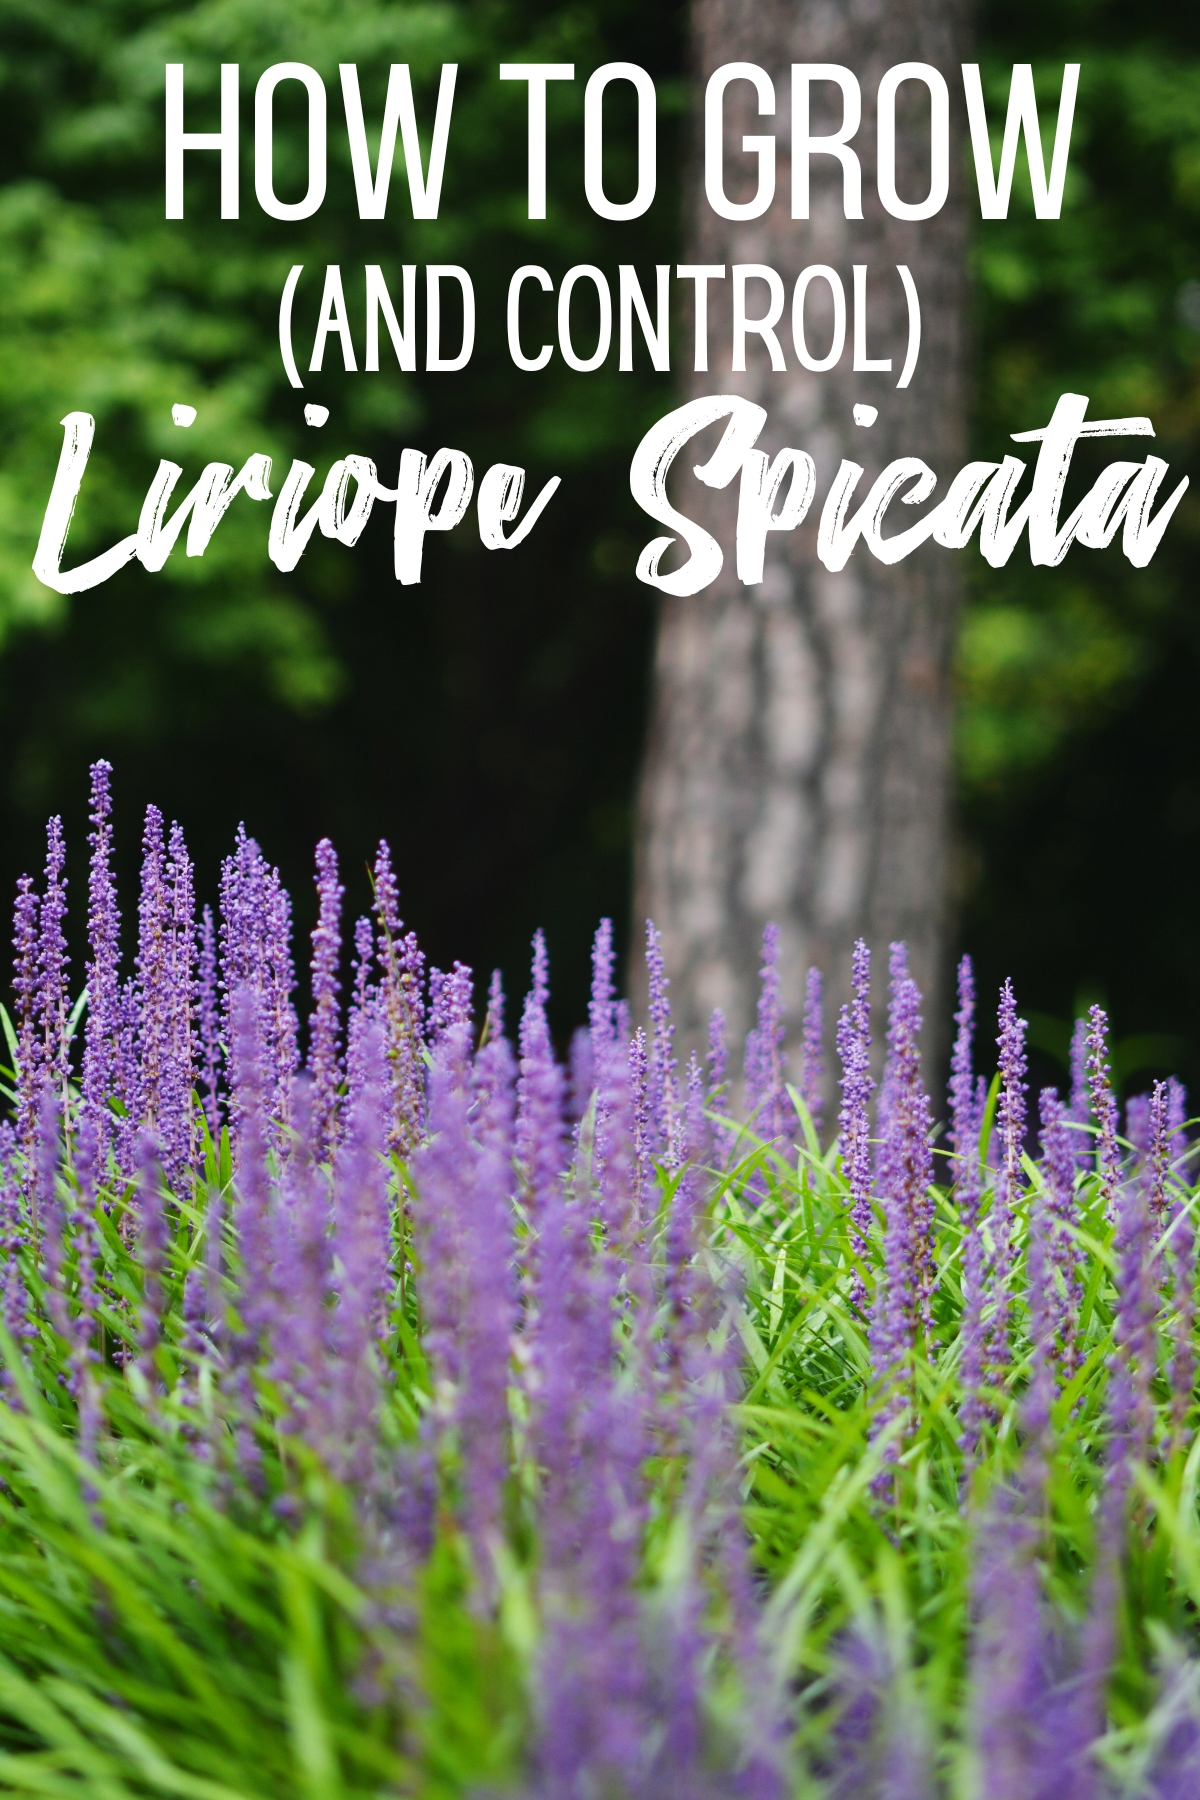 how to grow and control liriope spicata